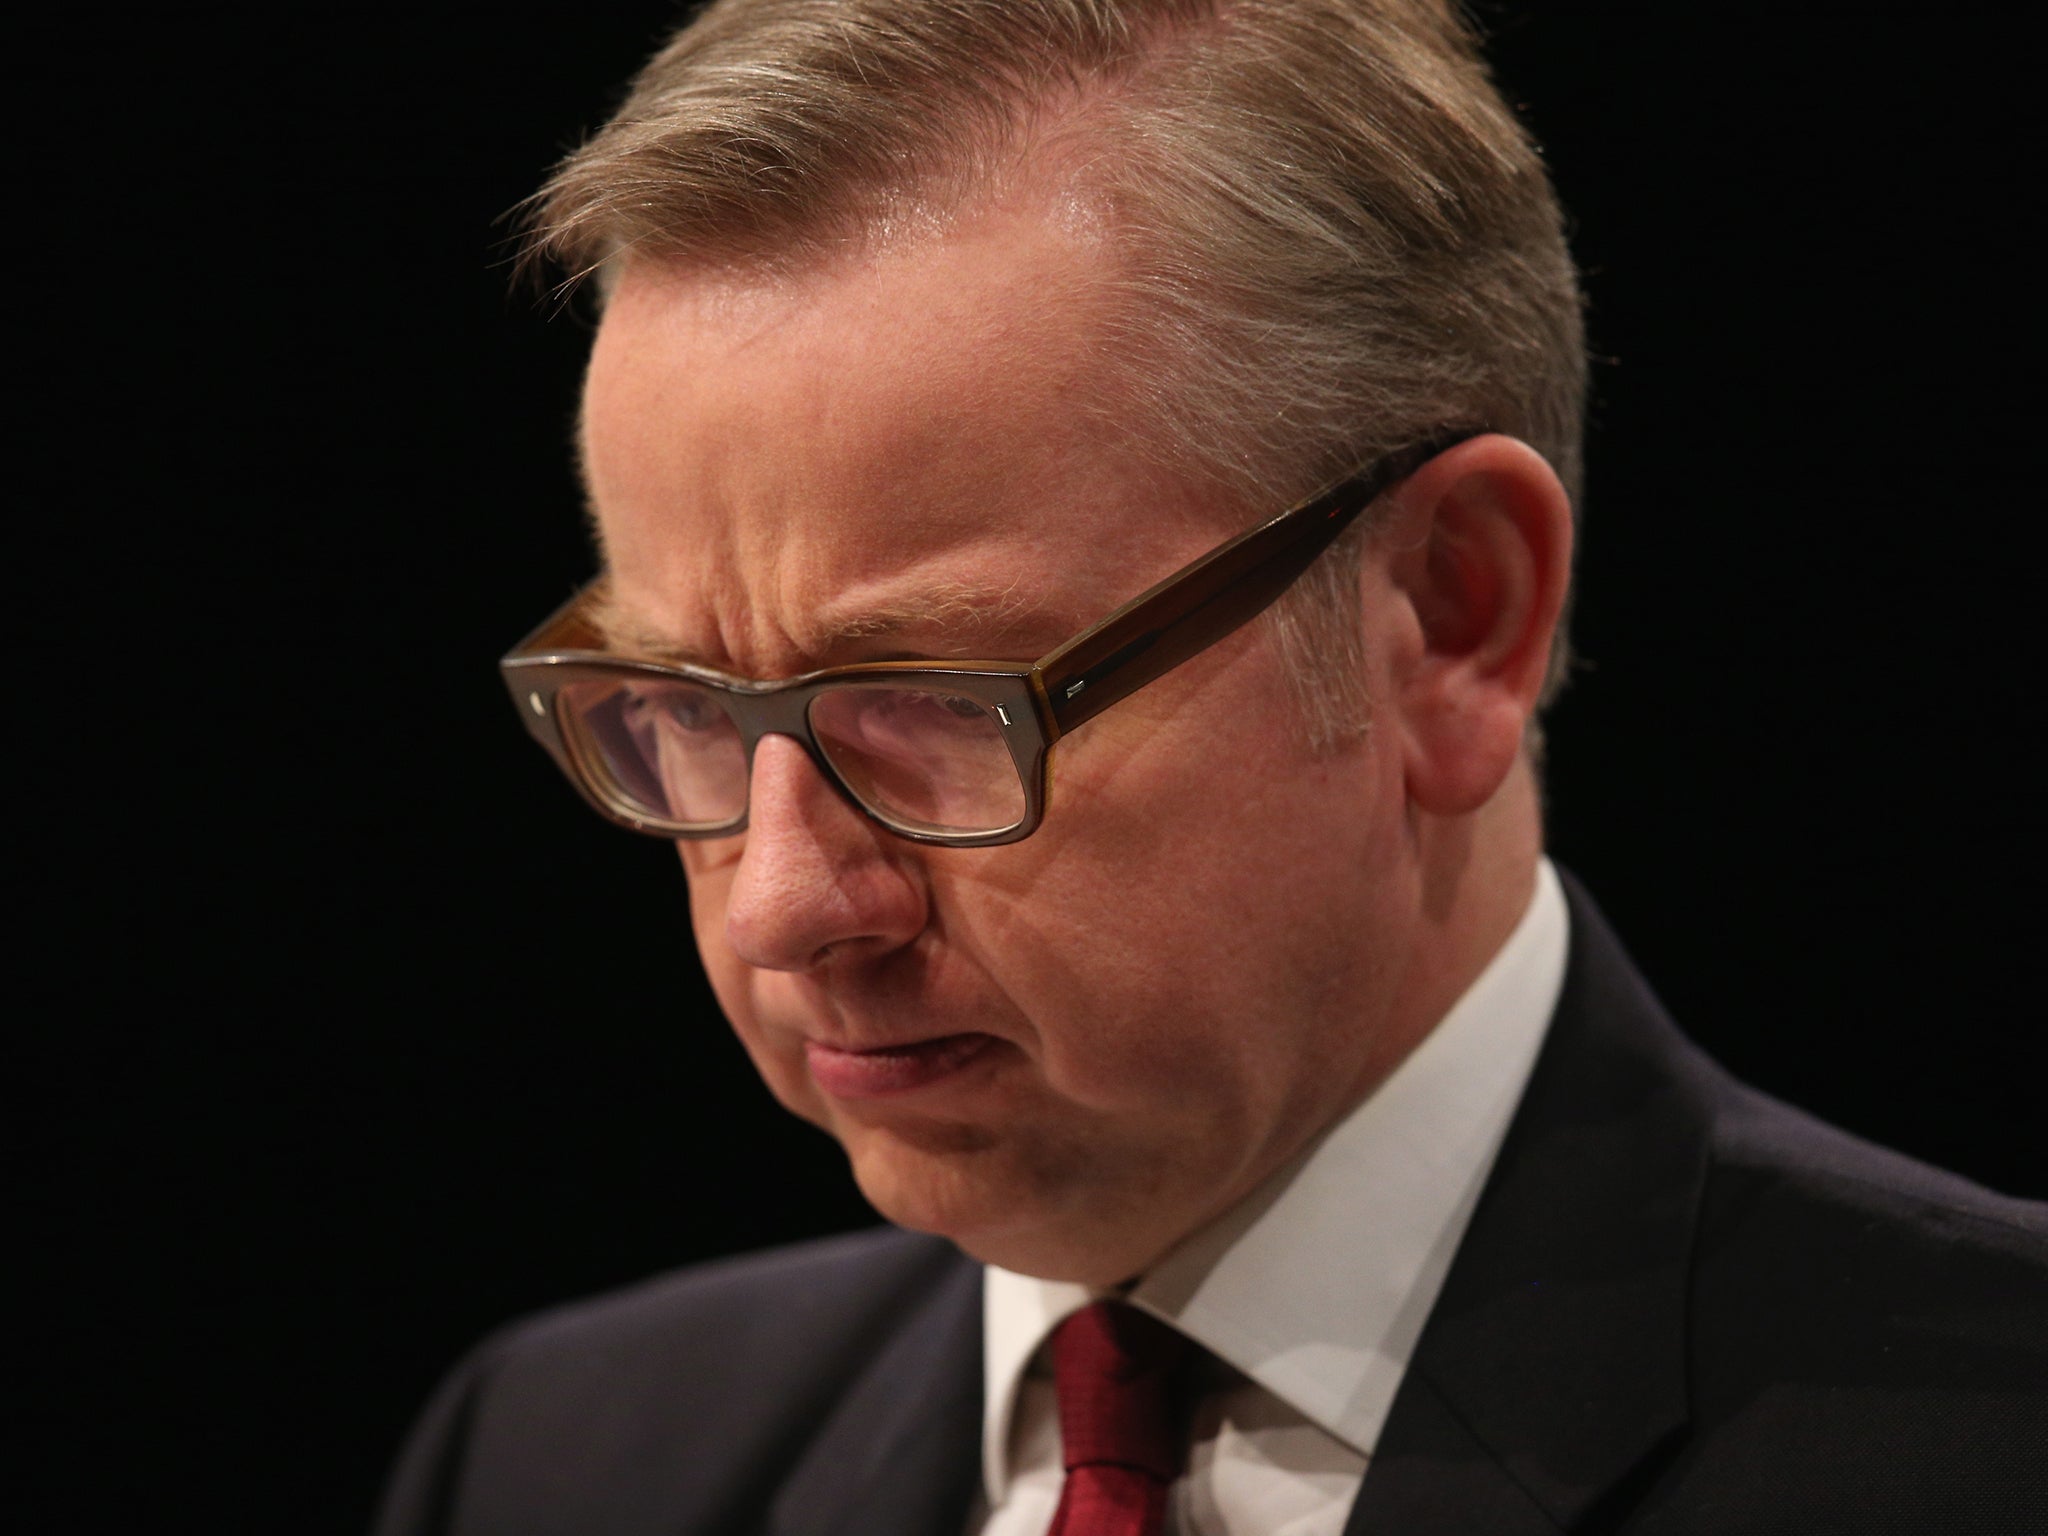 Michael Gove's appointment as Justice Secretary was unexpected